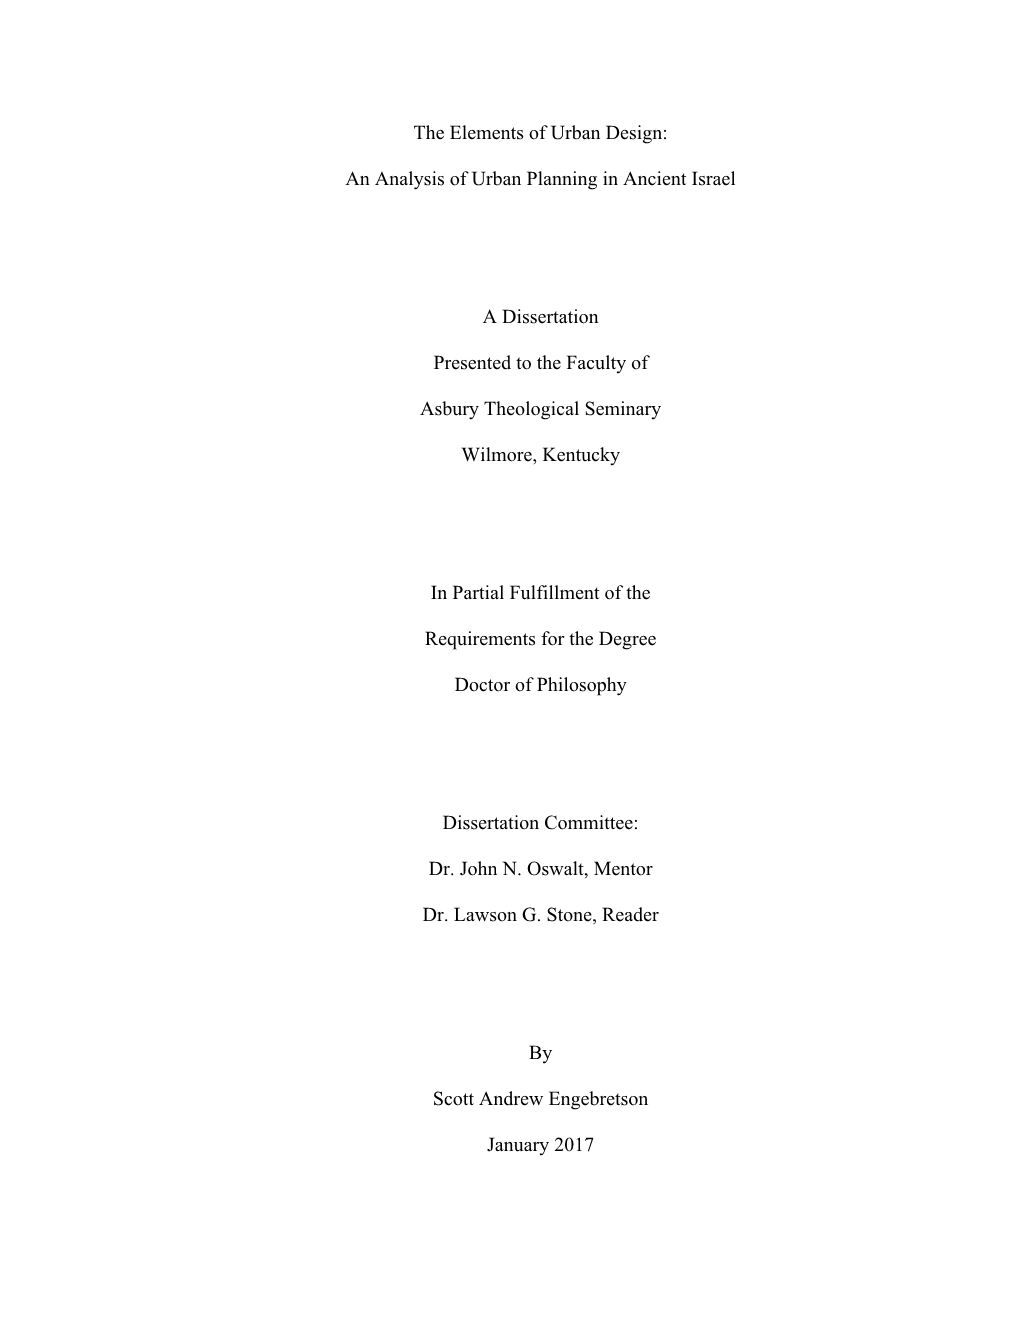 An Analysis of Urban Planning in Ancient Israel a Dissertation